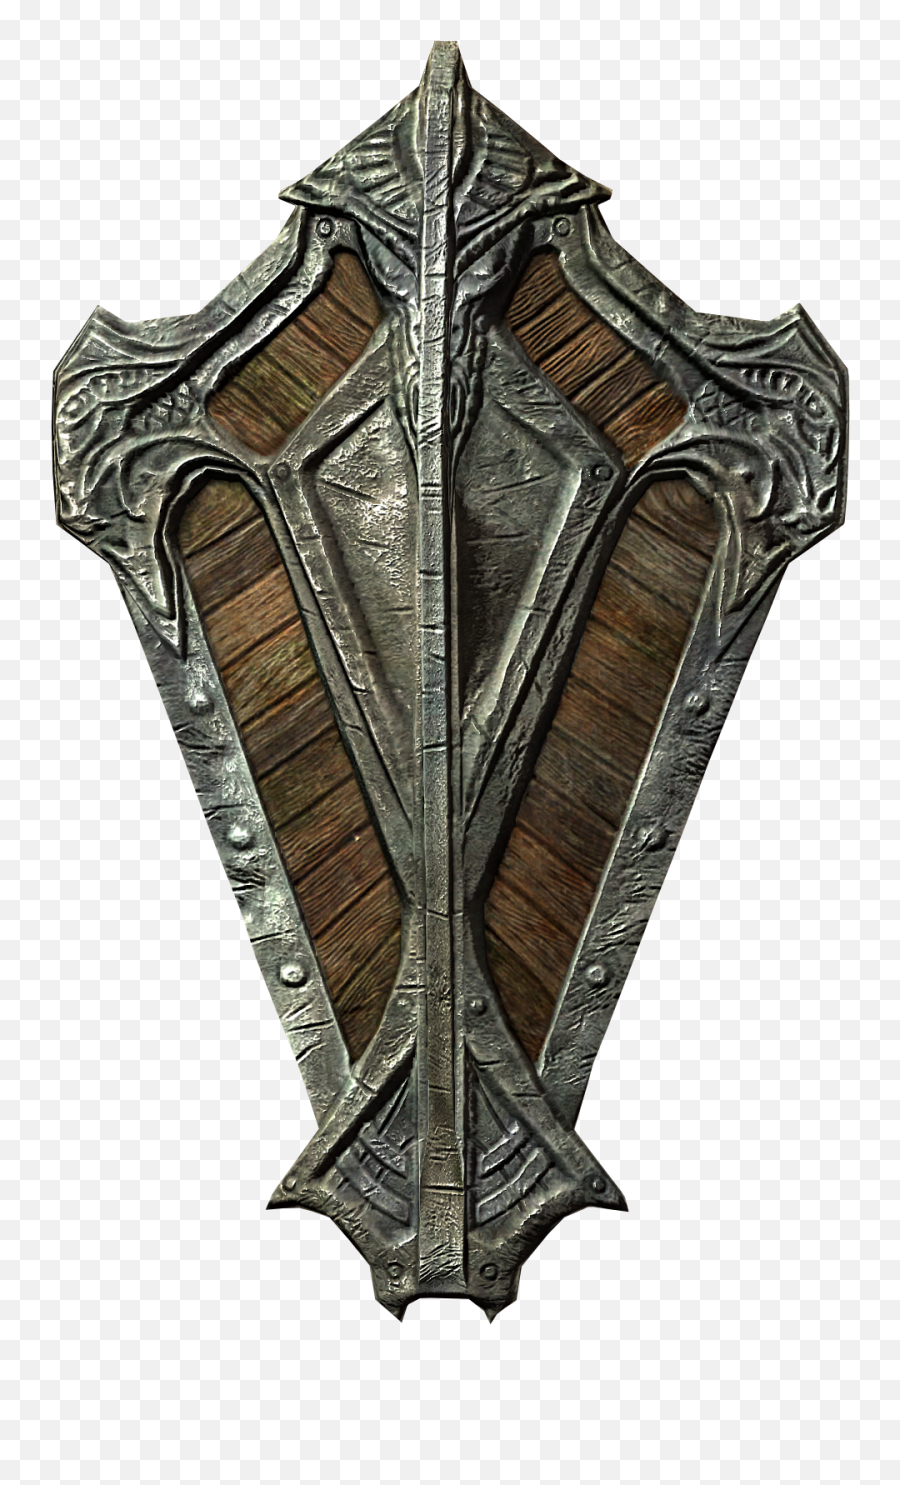 Old Shield Png Image Free Picture Download - Skyrim Shield,Shield Png